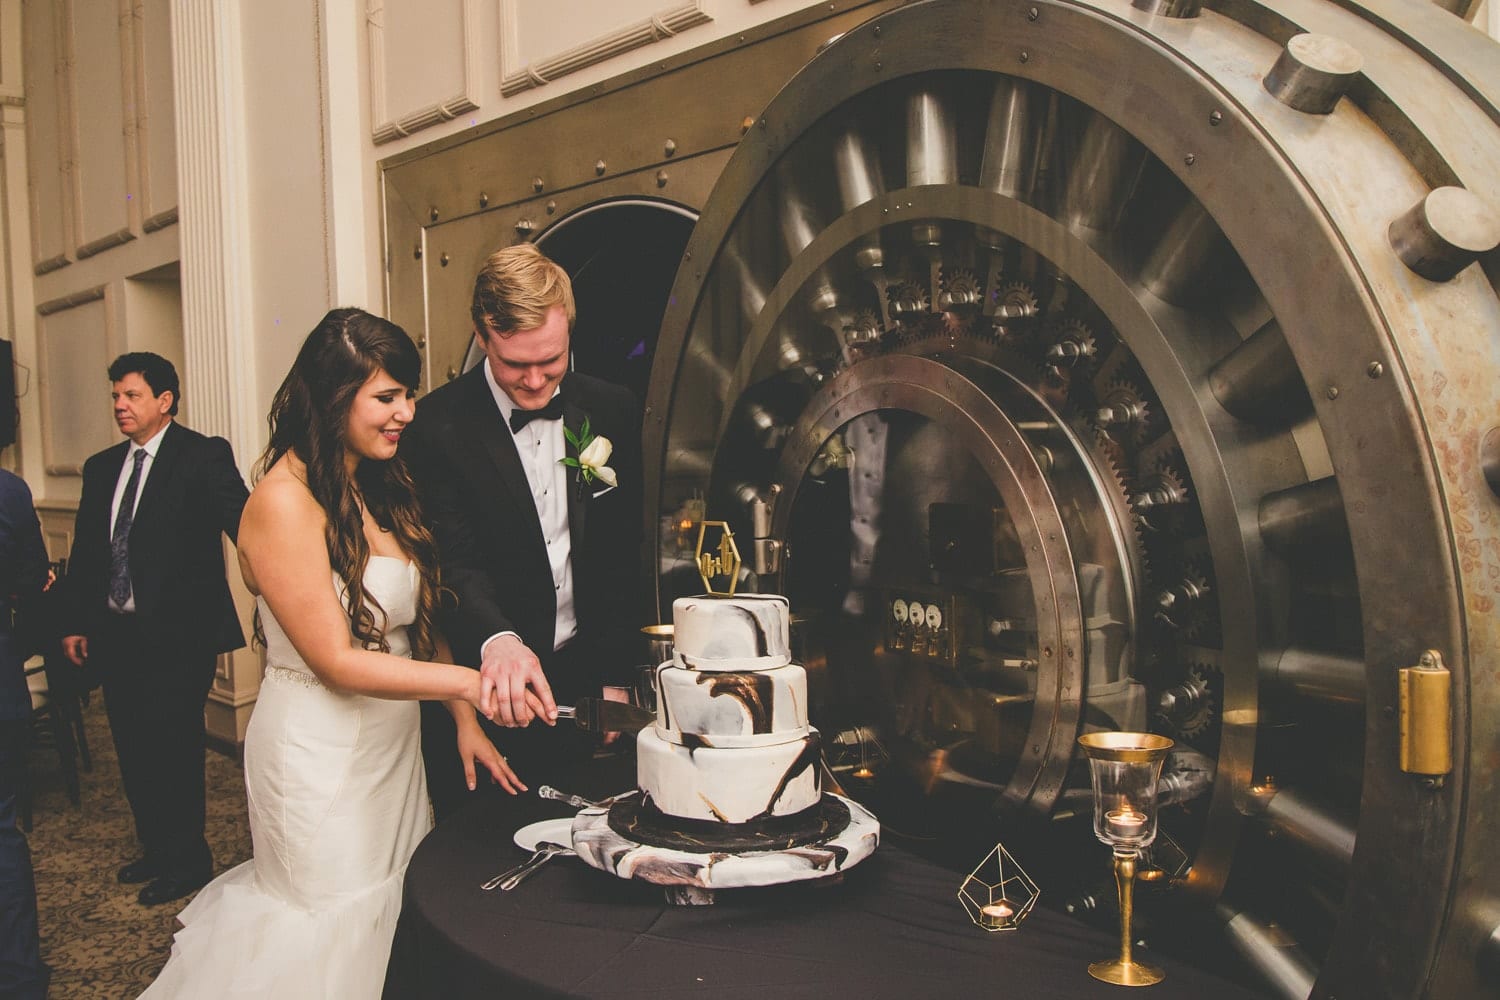 Cake cutting | Modern St. Augustine Wedding at The Treasury on The Plaza